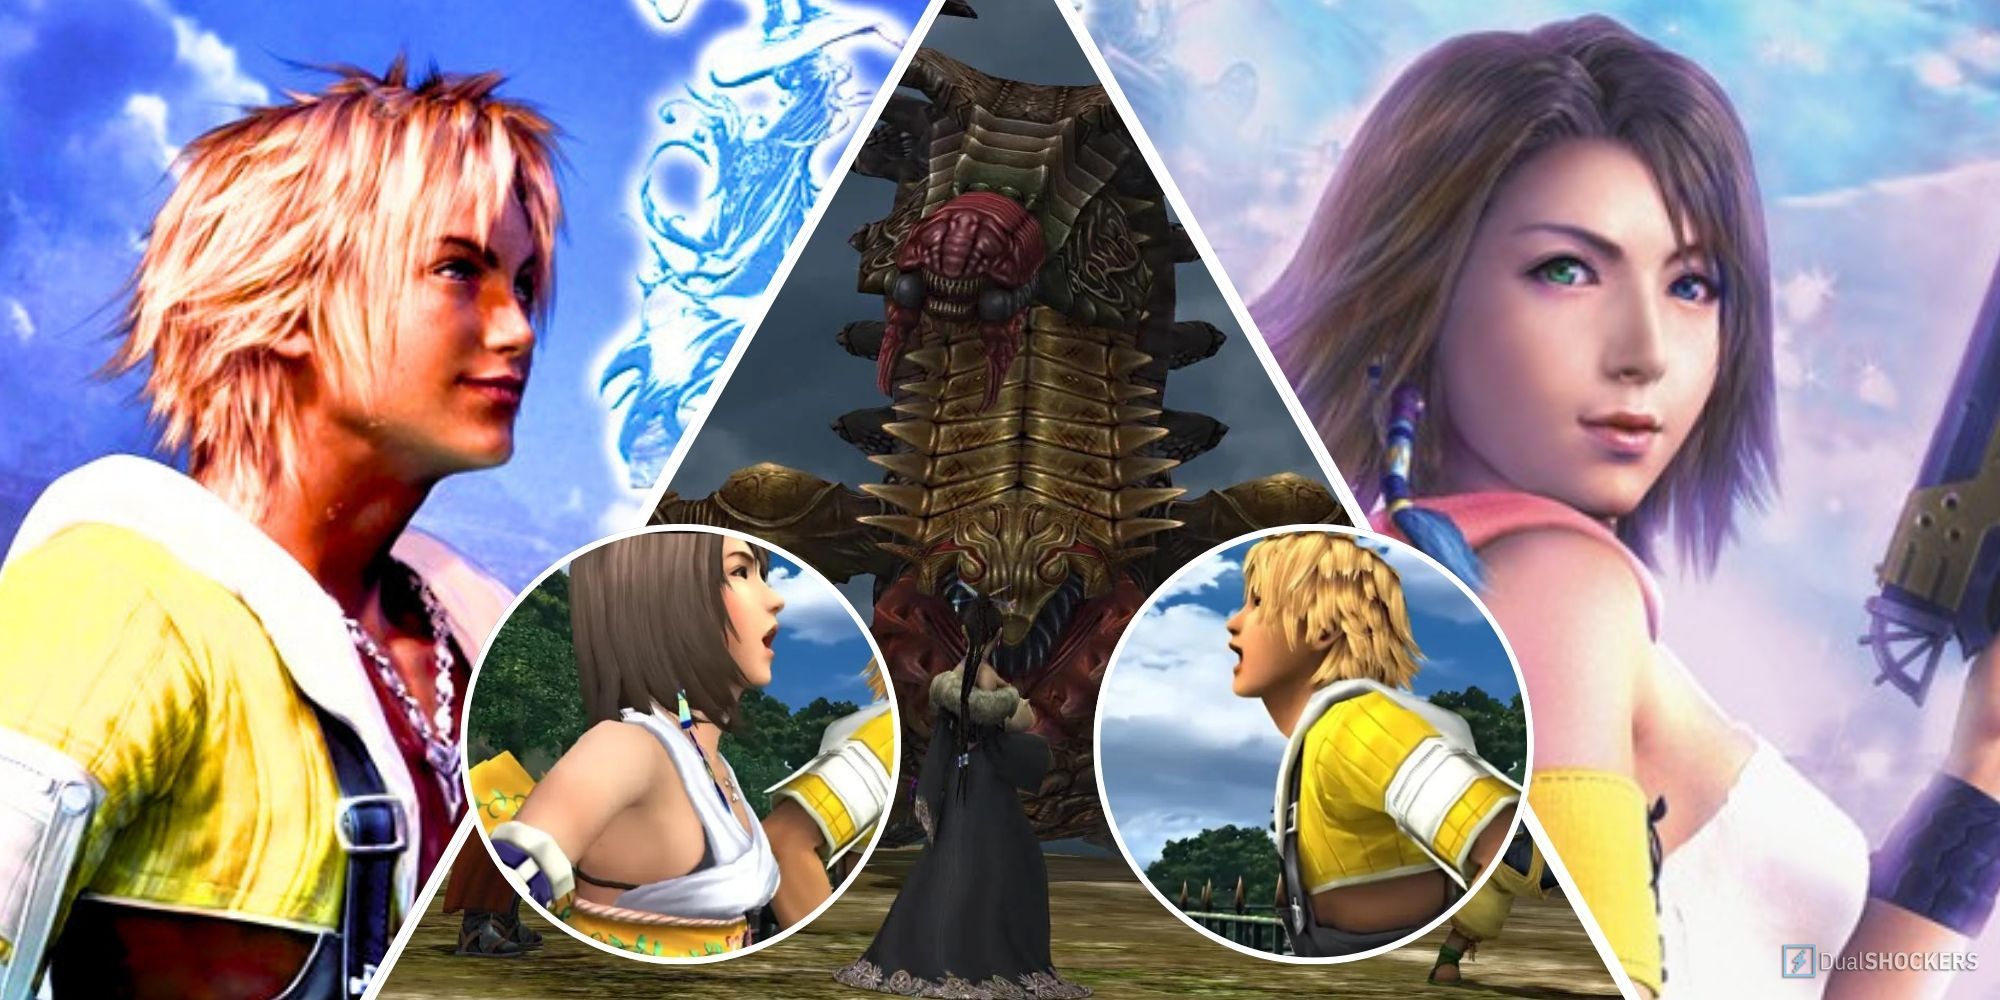 Split image from Final Fantasy X of Tidus and Yuna either side of a Sinspawn.